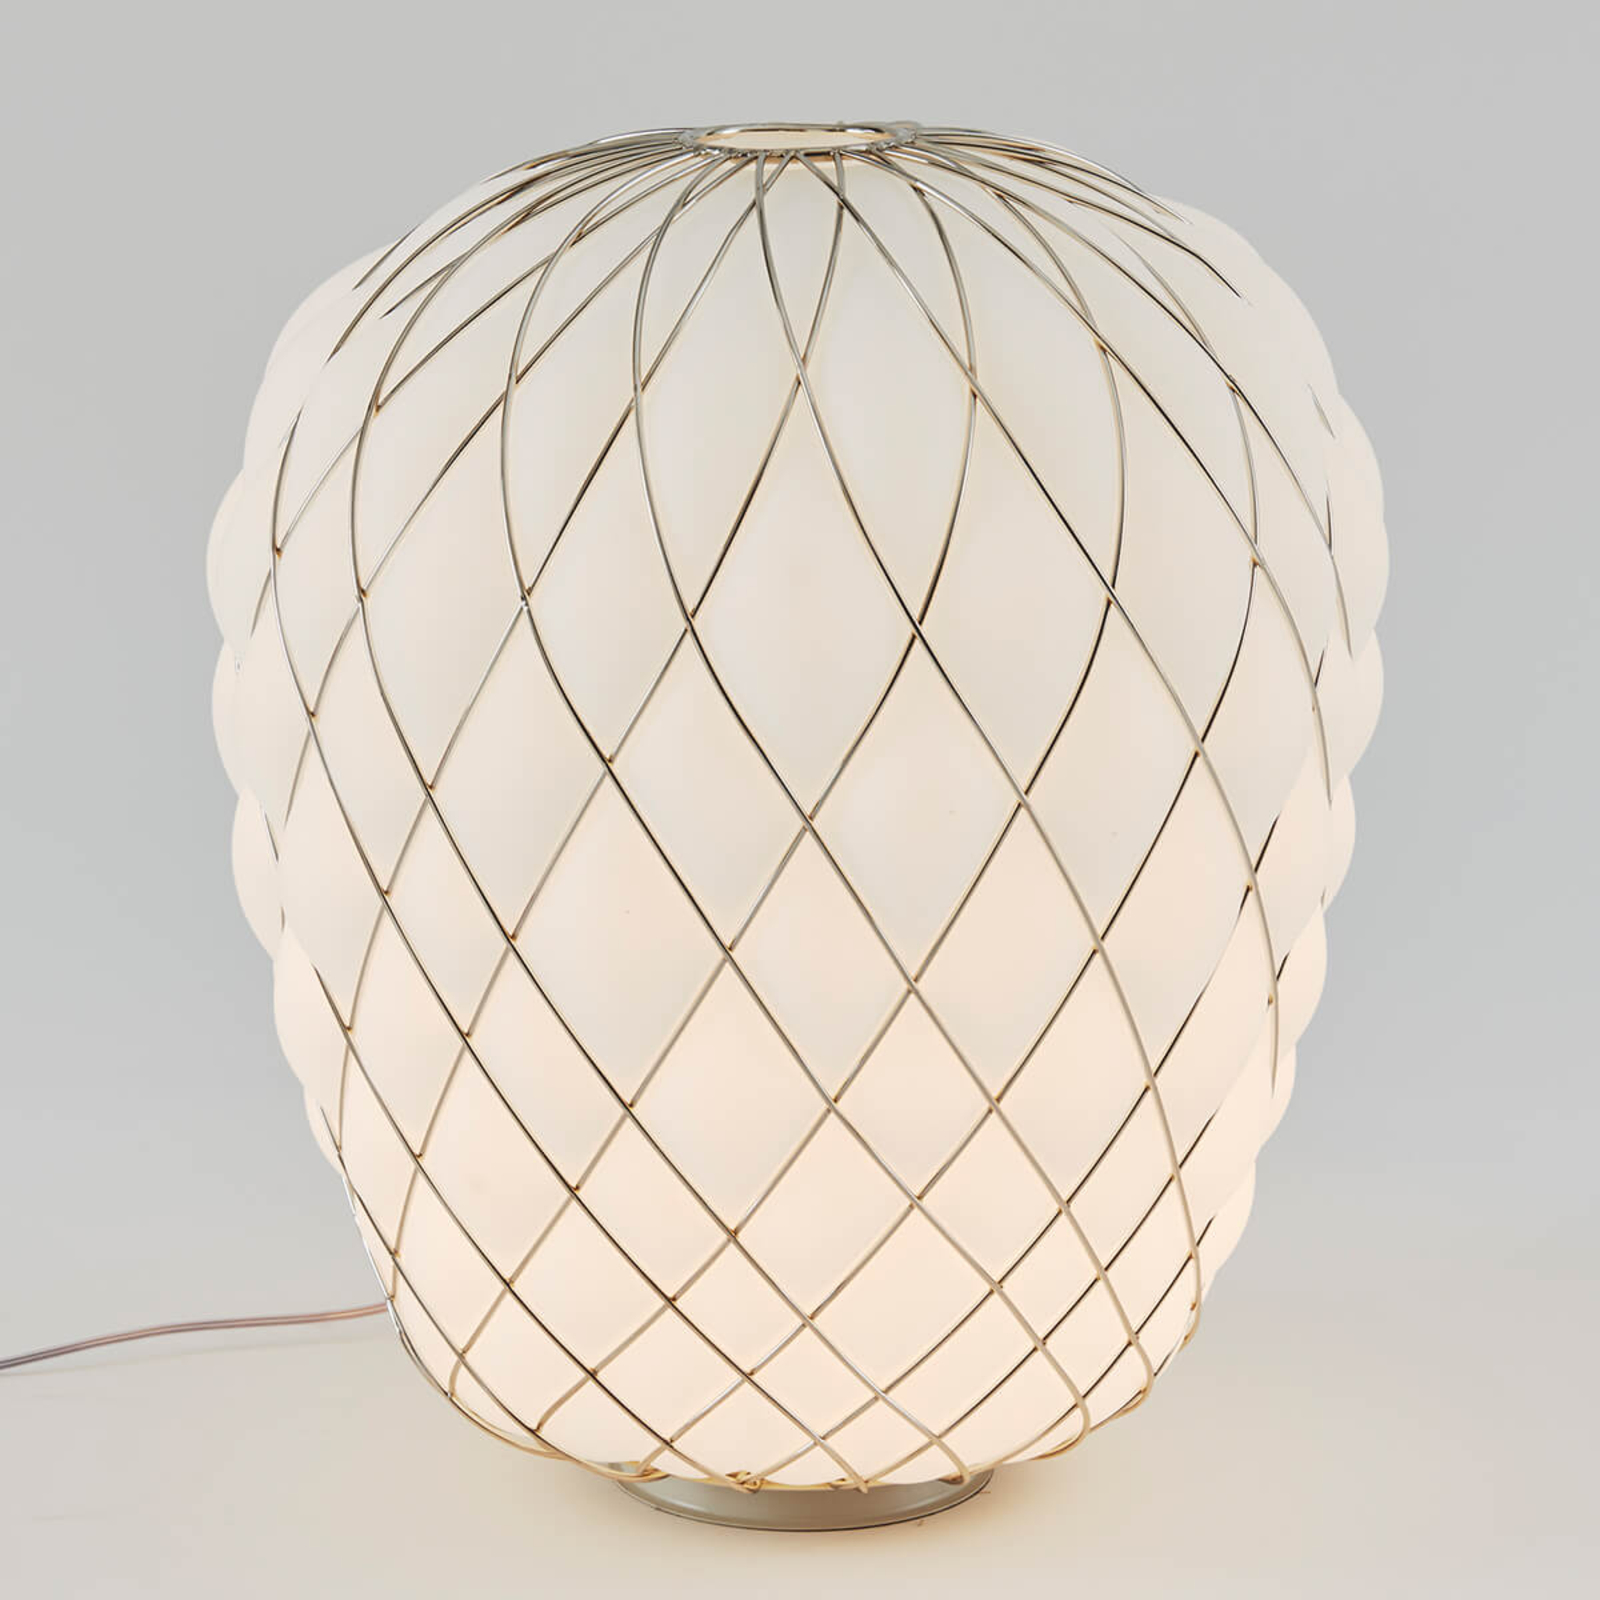 Designer table lamp Pinecone made of milky glass